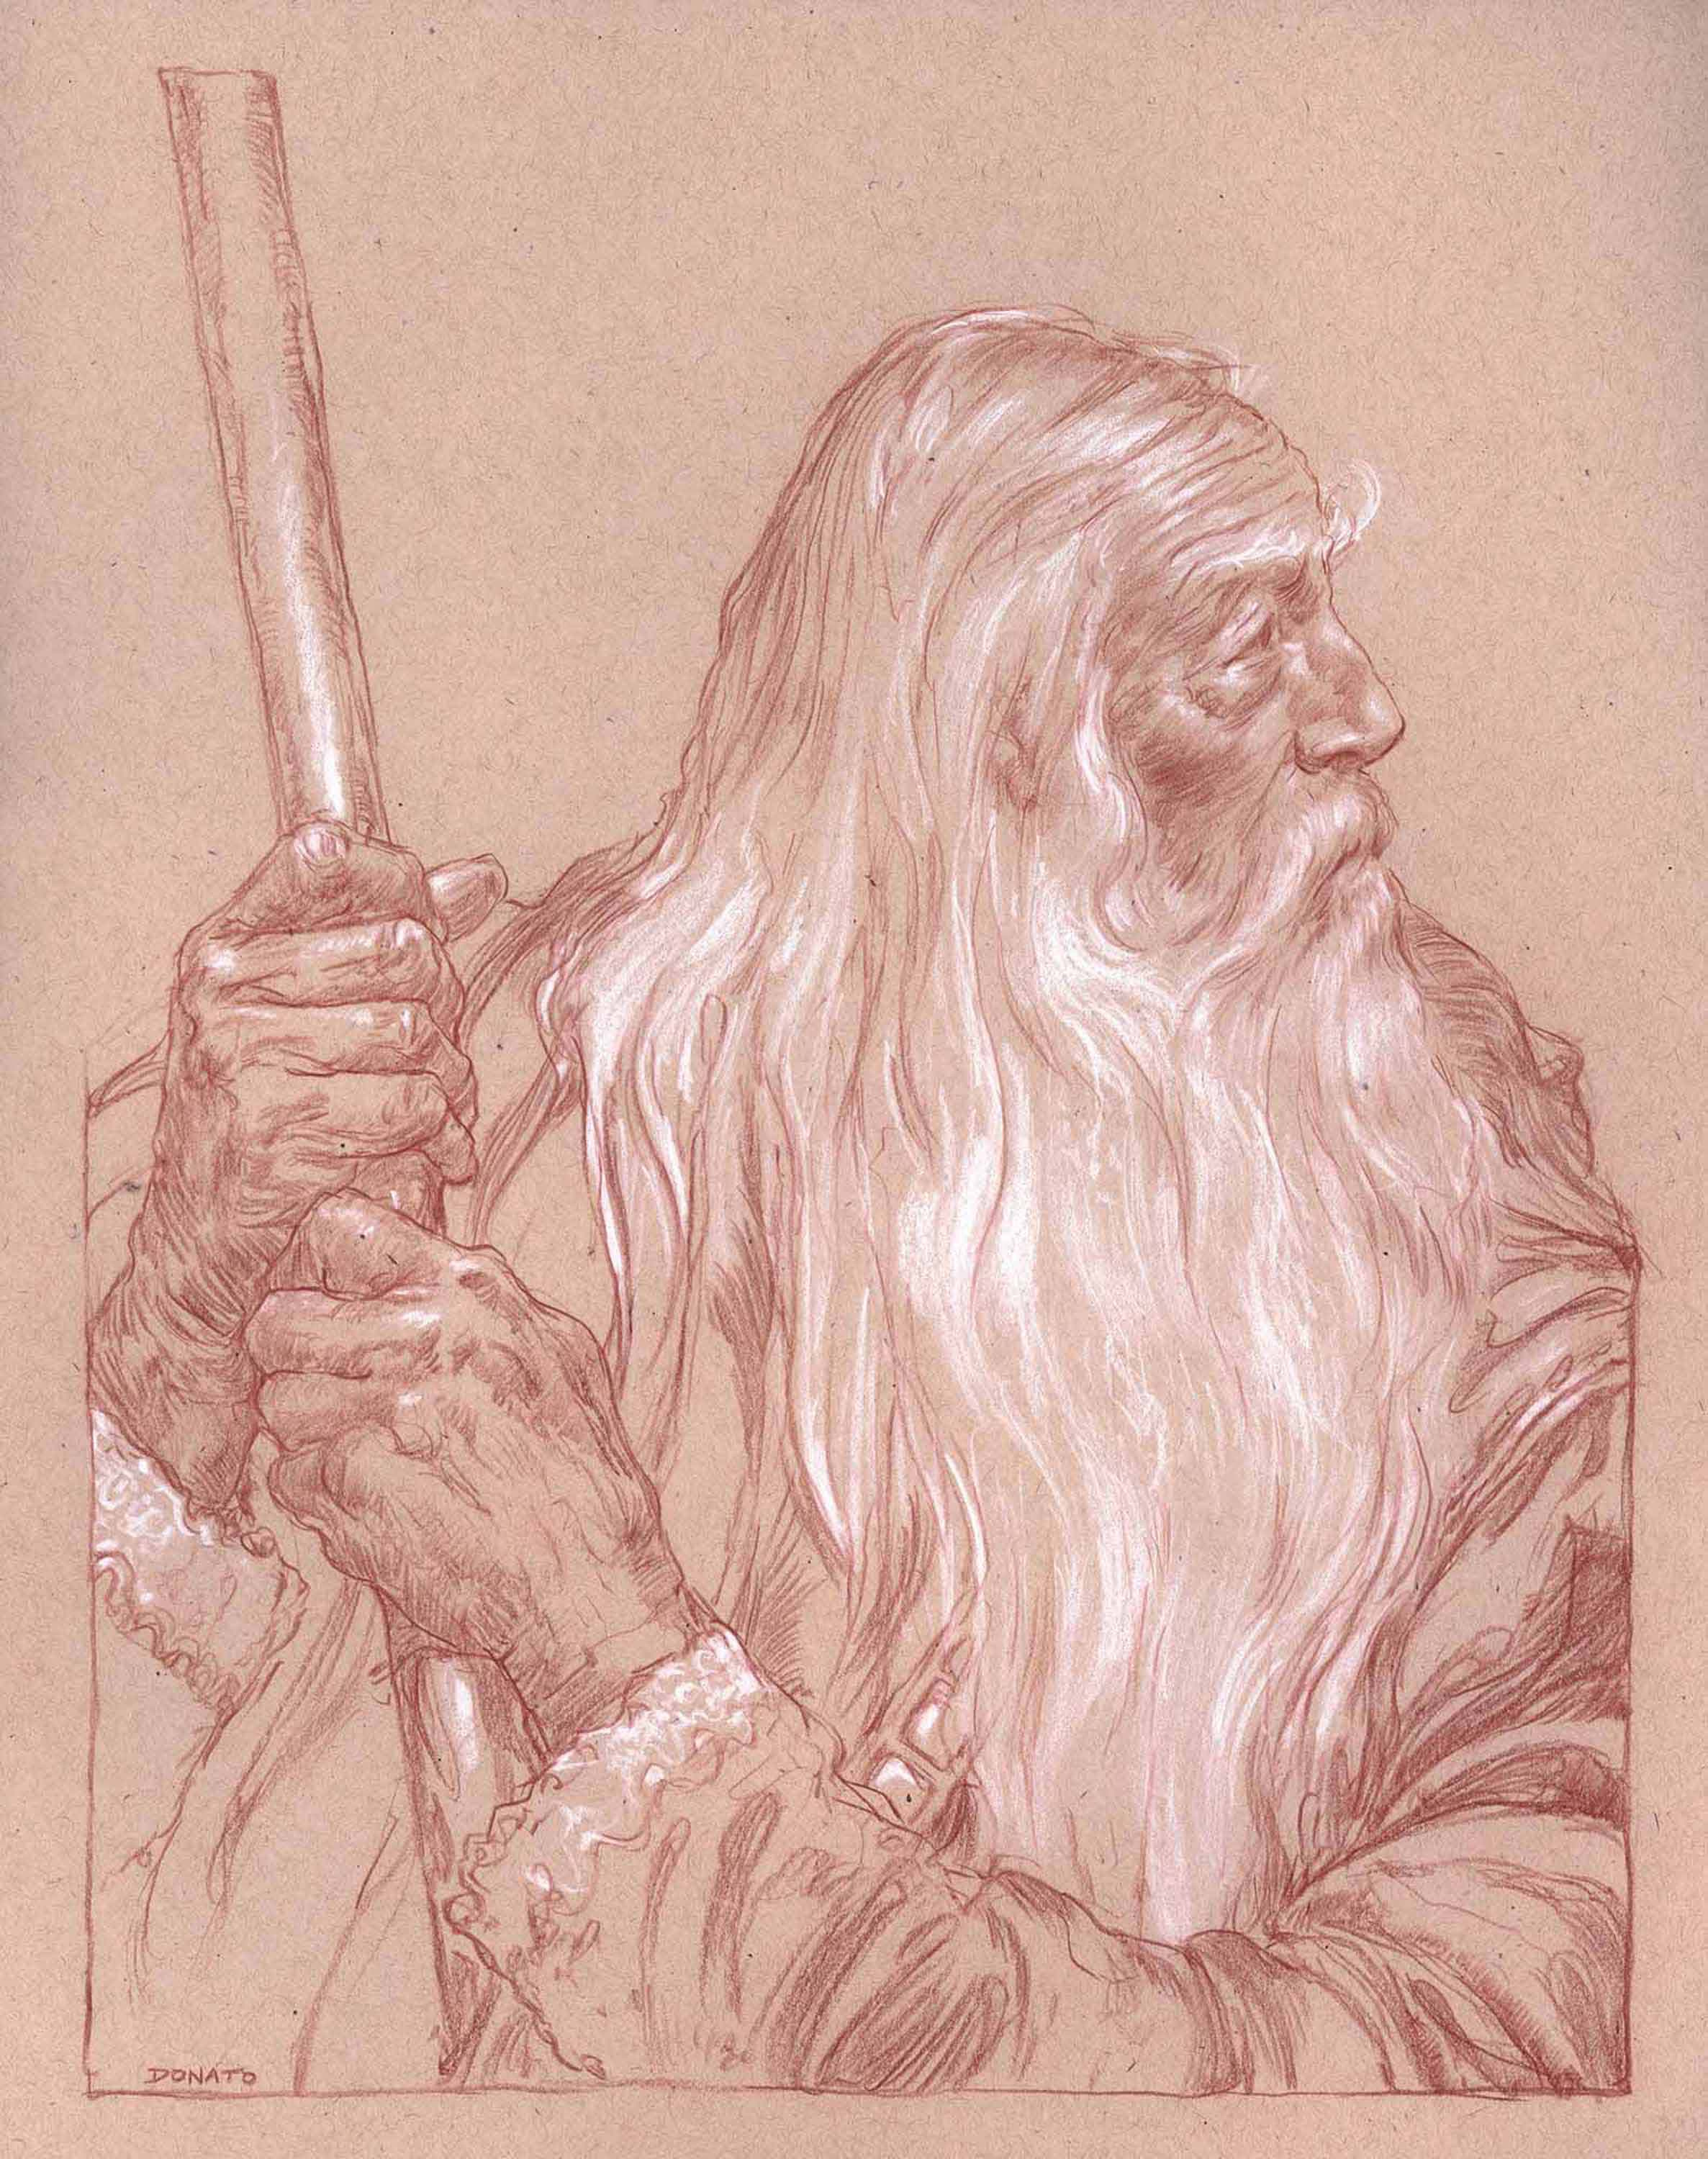 Gandalf at Caradhras
14" x11"  Watercolor Pencil and Chalk on Toned paper 2016
private collection